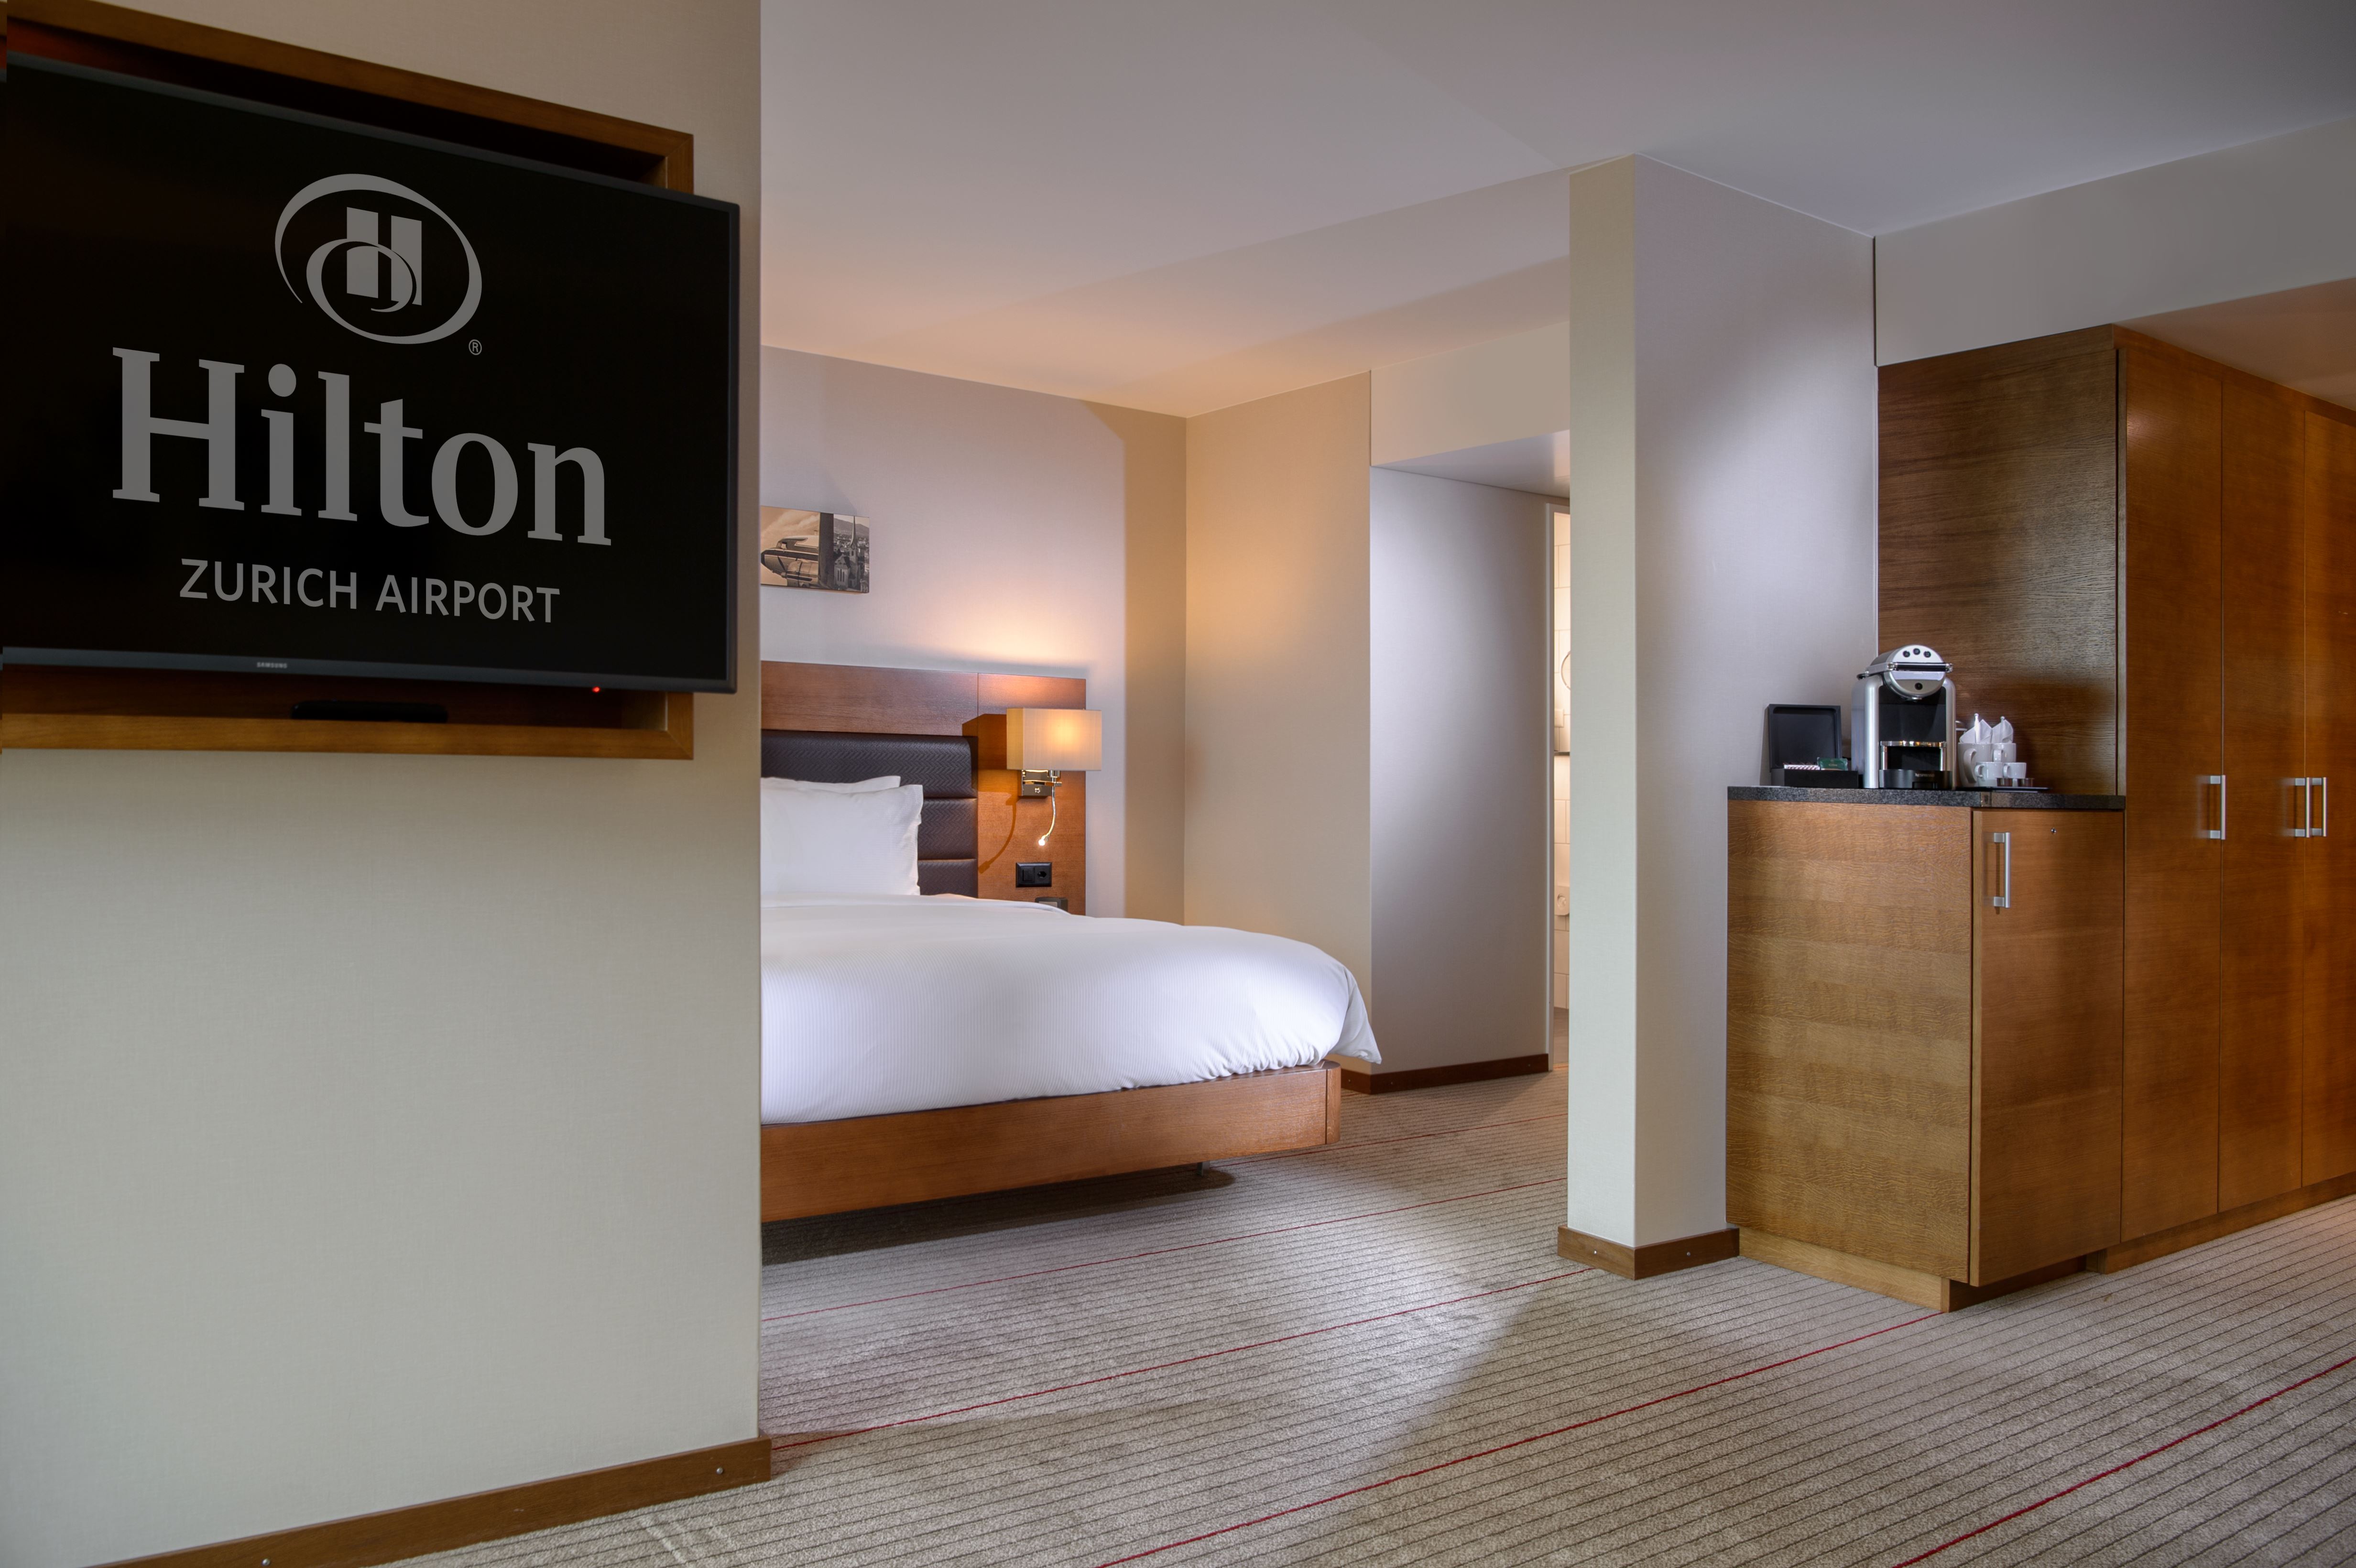 Angle View of Queen Junior Suite with Hilton Logo